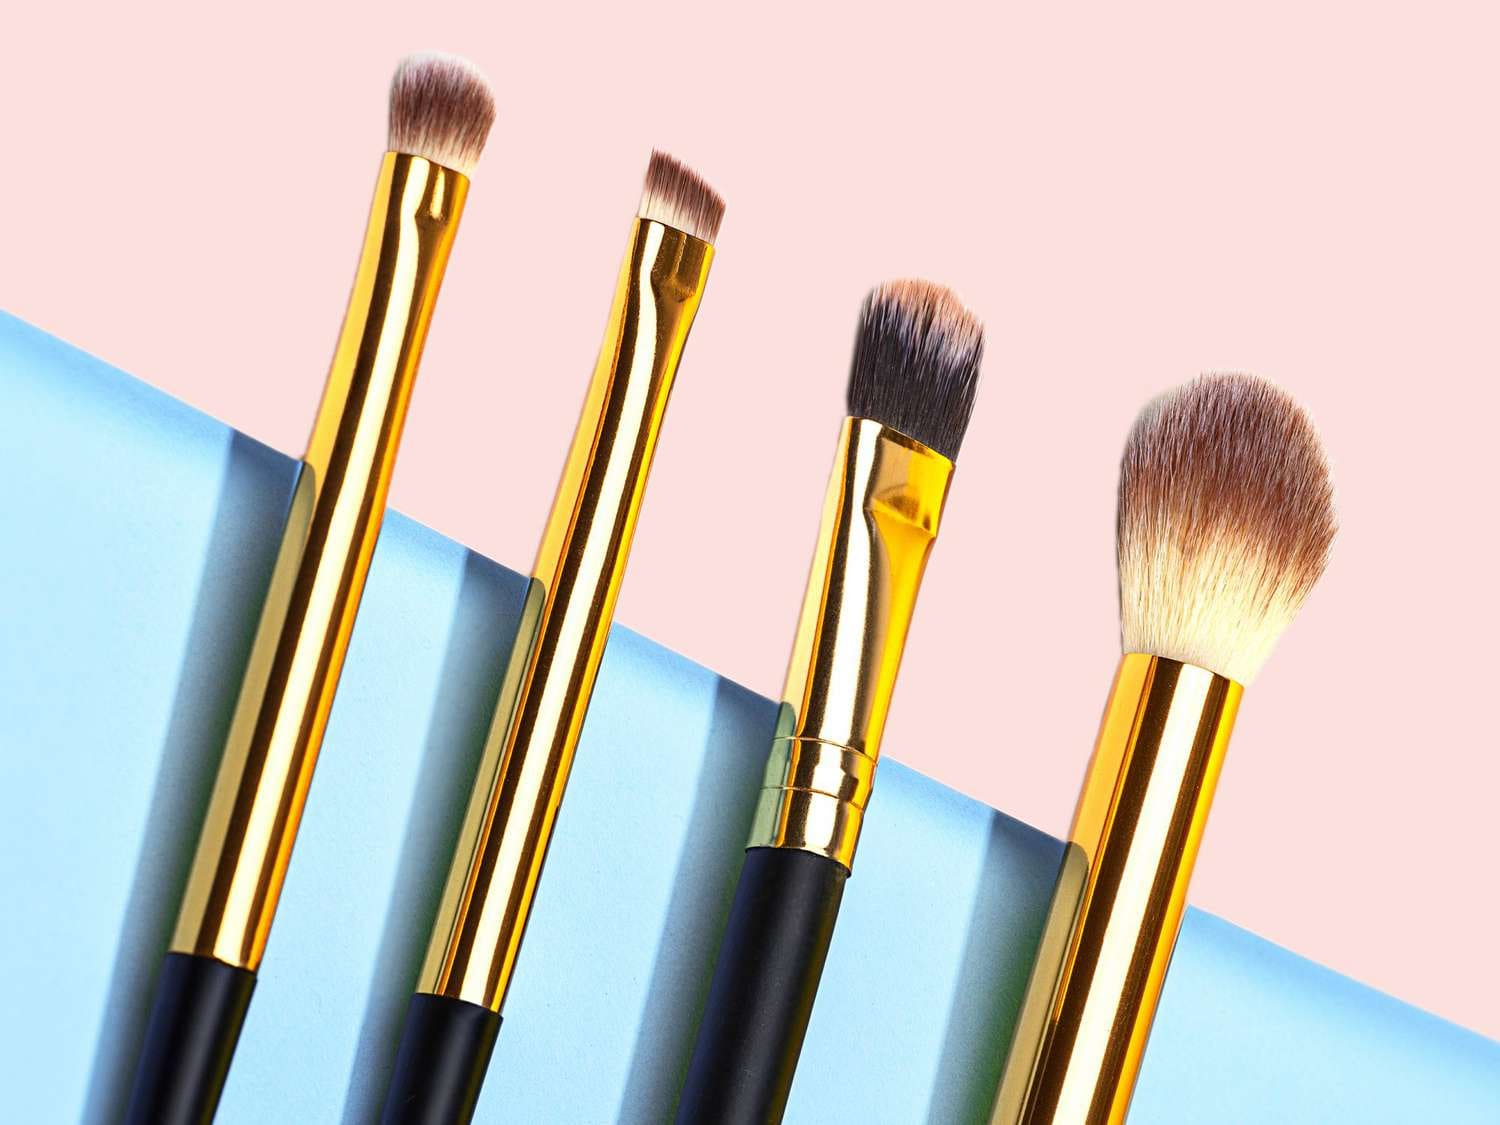 For Flawless Eyeshadow, brush choice is key. Opt for a flat brush for even application and a soft blending brush for seamless edges. Synthetic concealer and fluffy brushes work wonders.